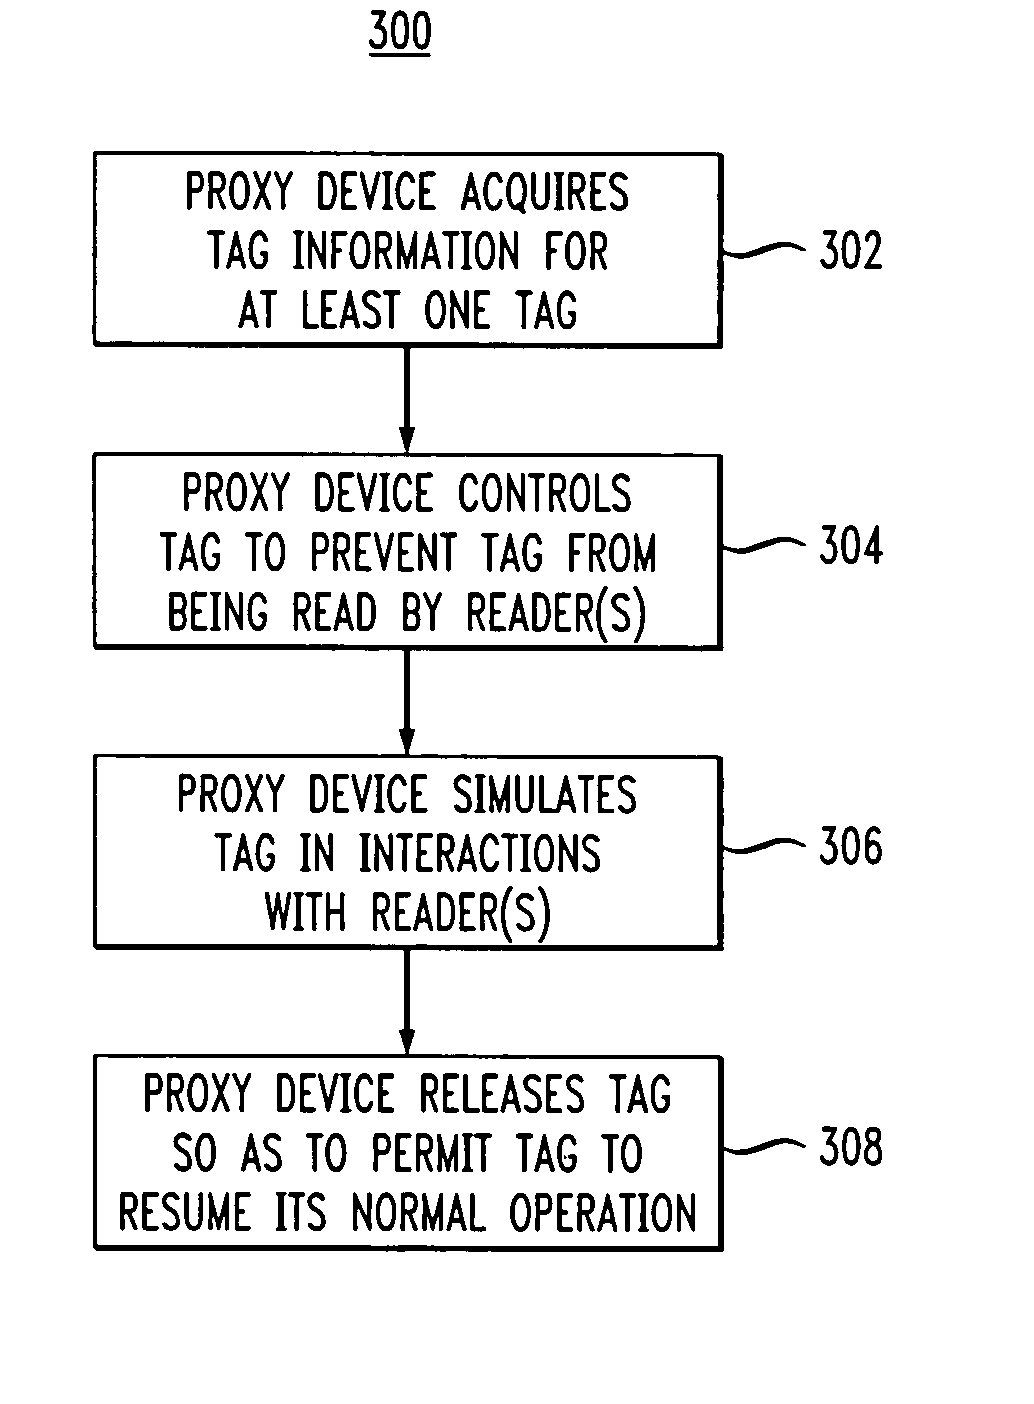 Proxy device for enhanced privacy in an RFID system